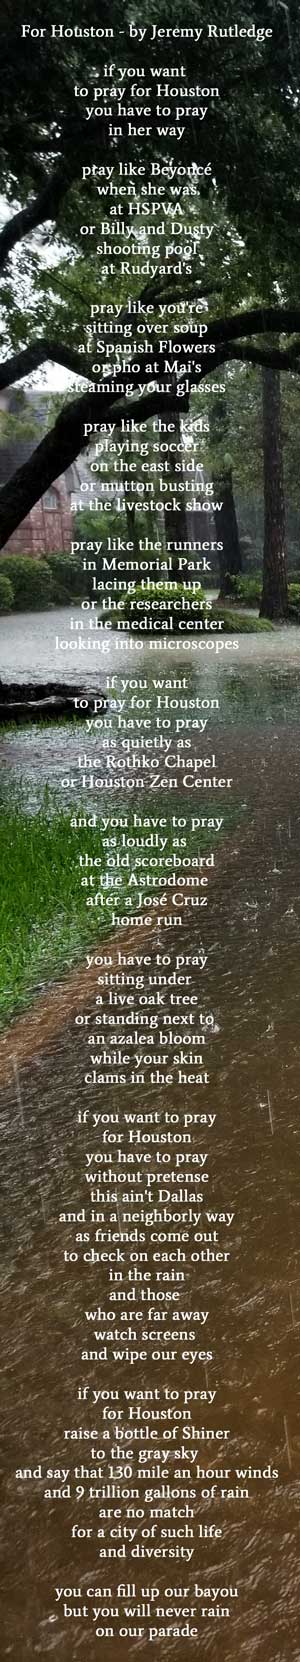 if you want to pray for Houston